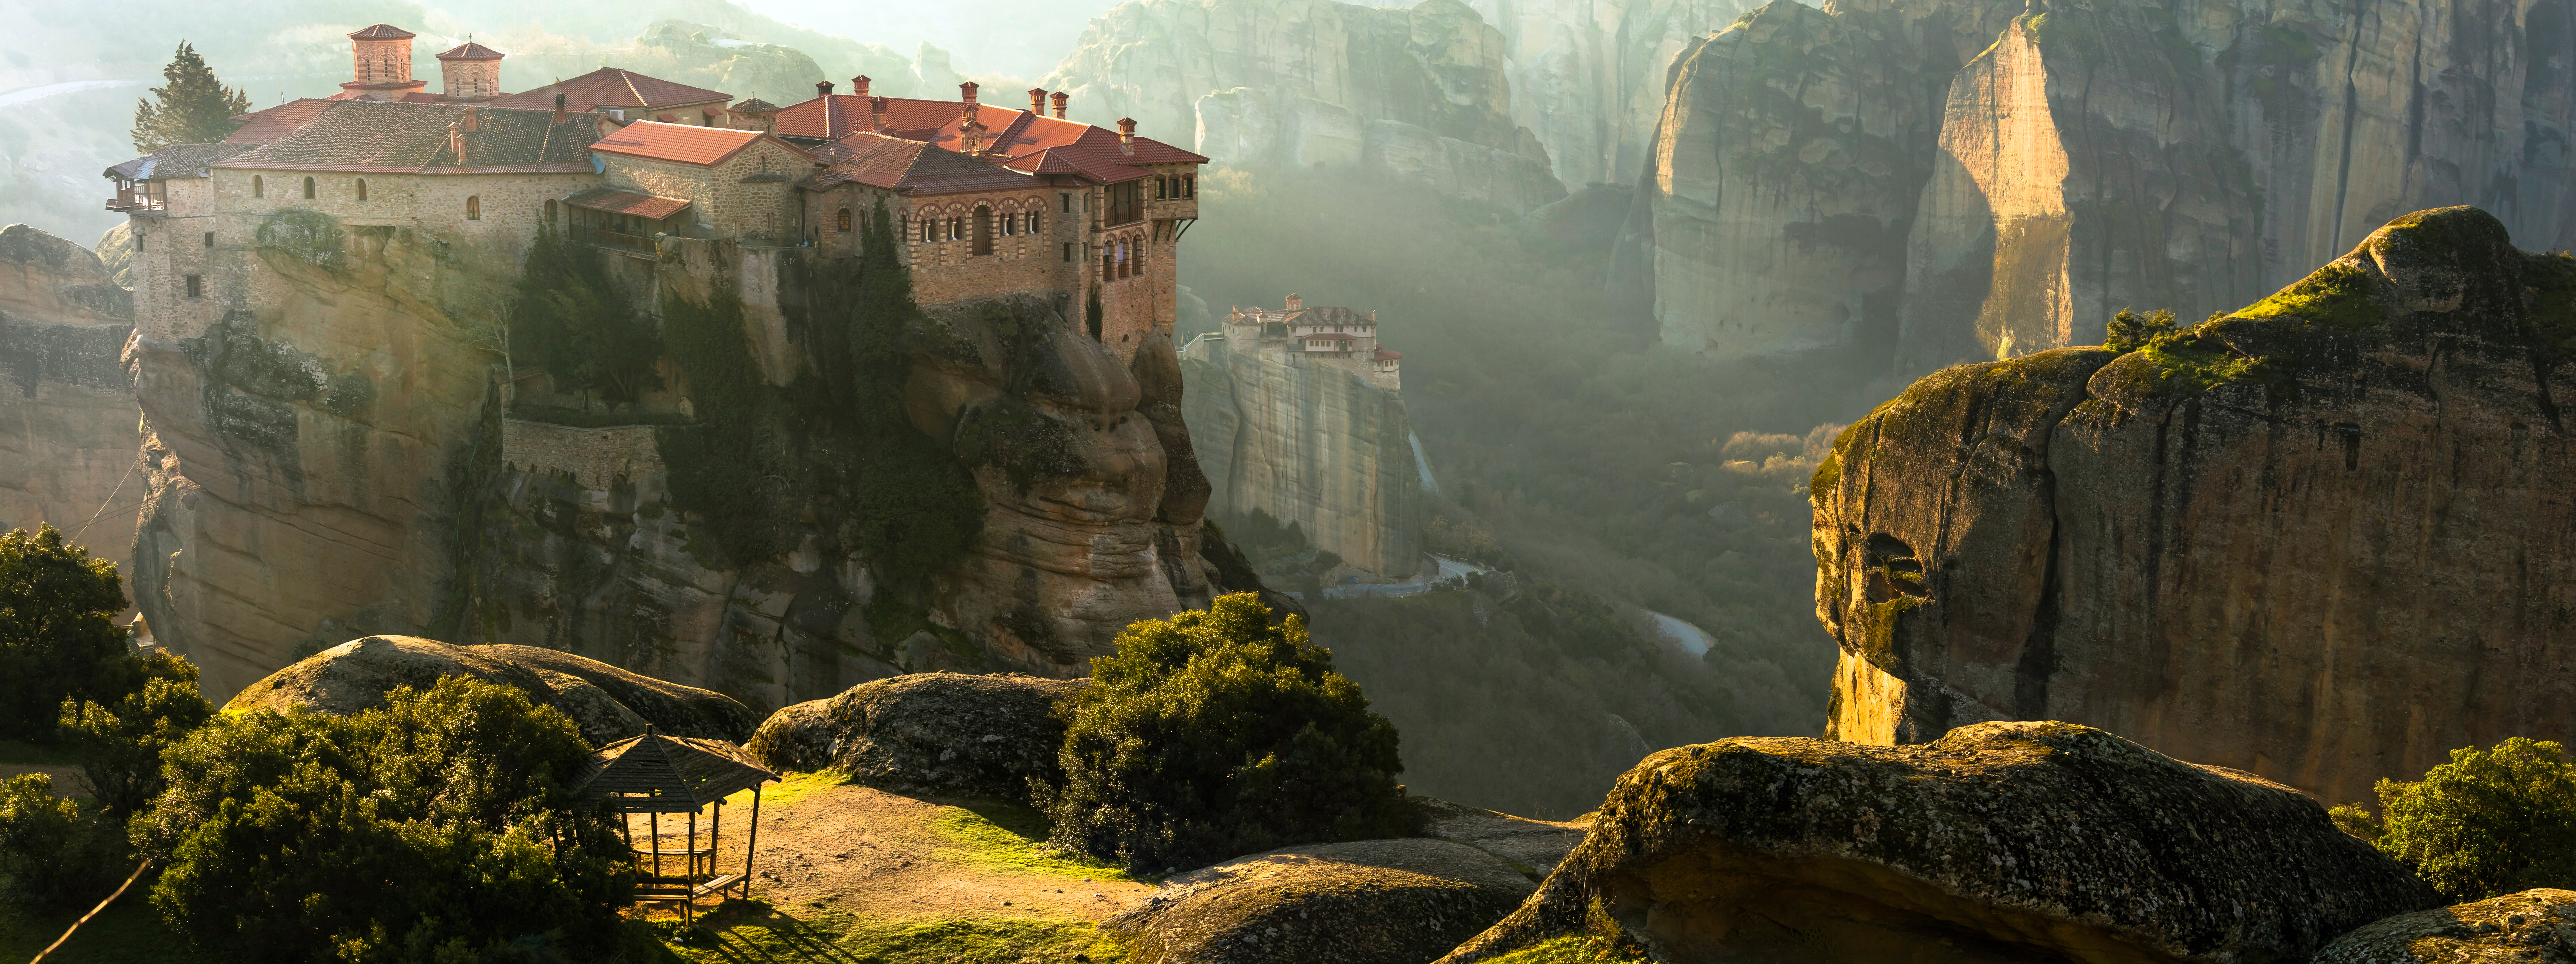 Meteora's monasteries often get skipped for the lure of the sunny islands, but should definitely be on an itinerary of northern Greece.